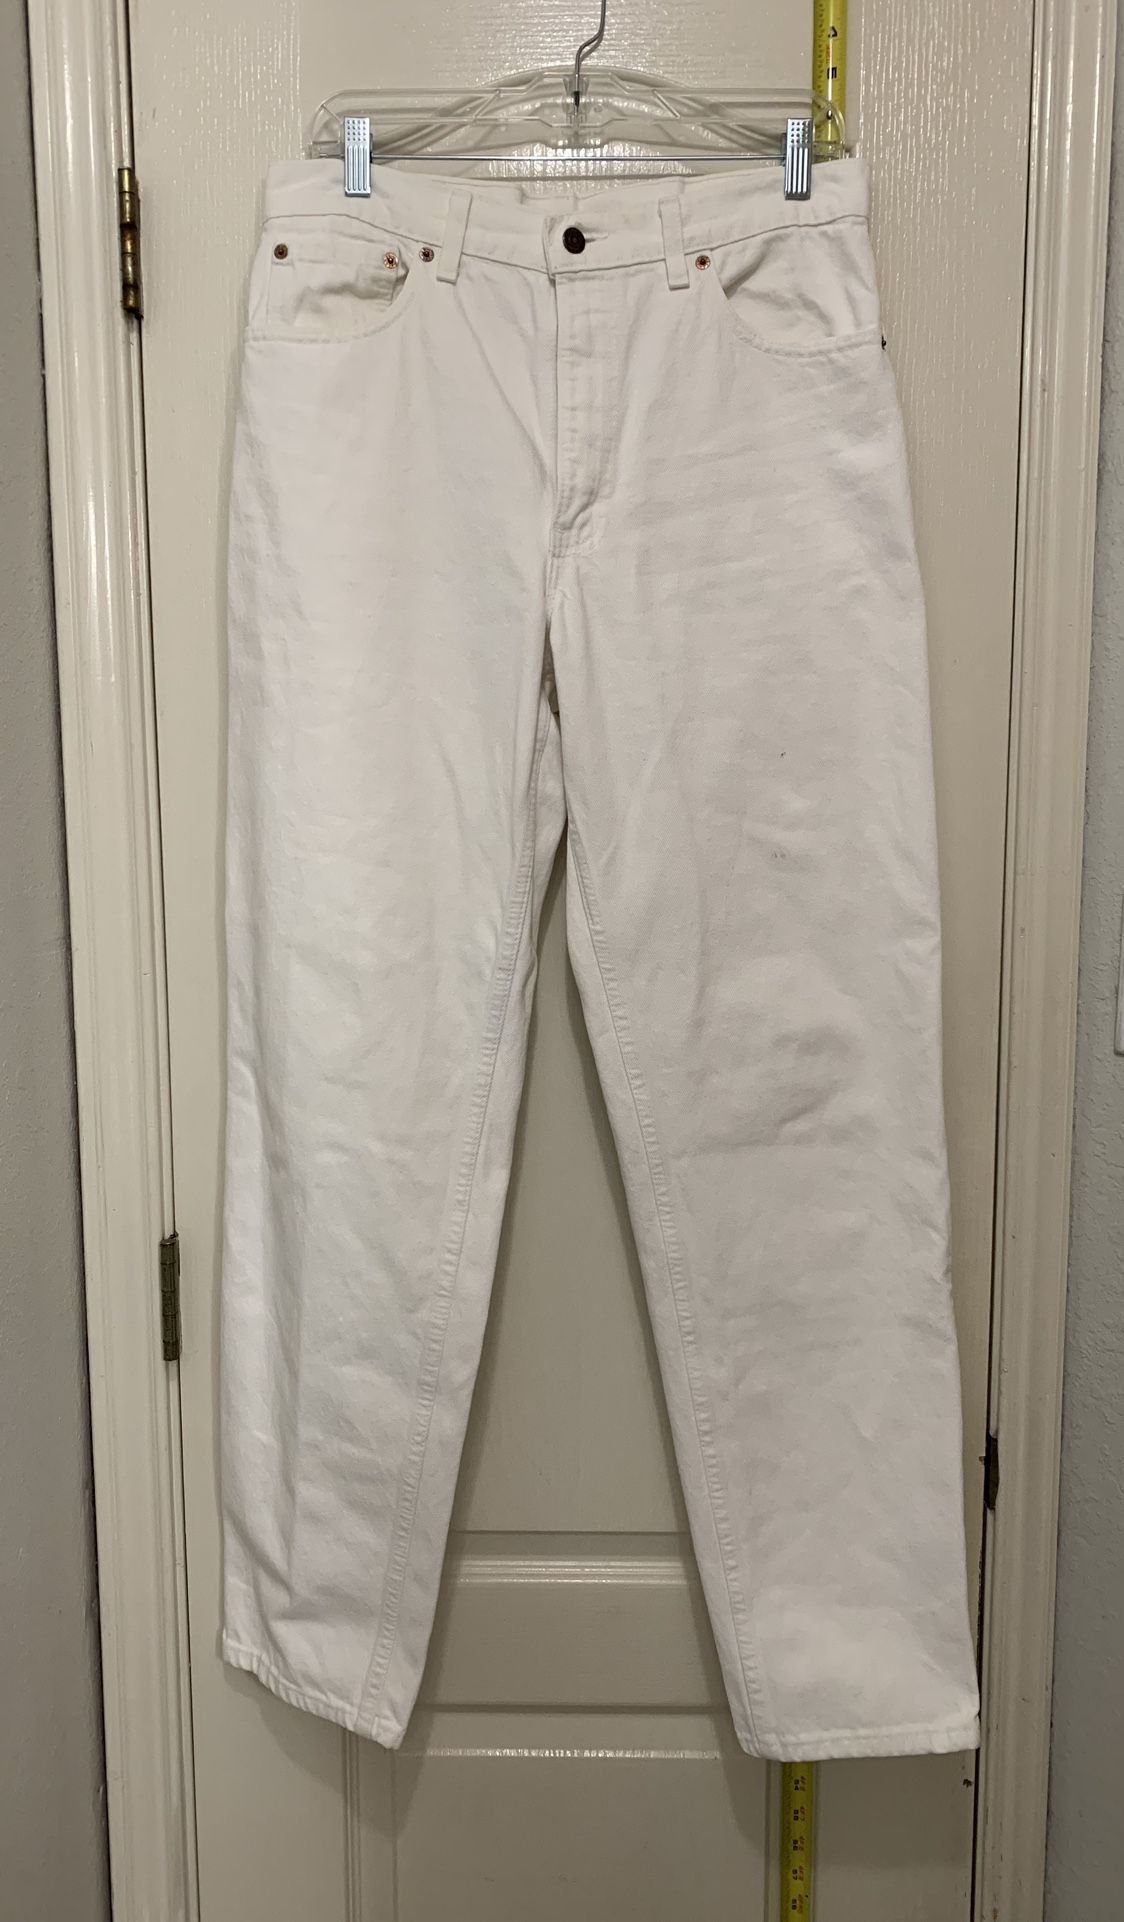 Mens Levi’s Relaxed Fit 550 Size 32x32 White Jeans